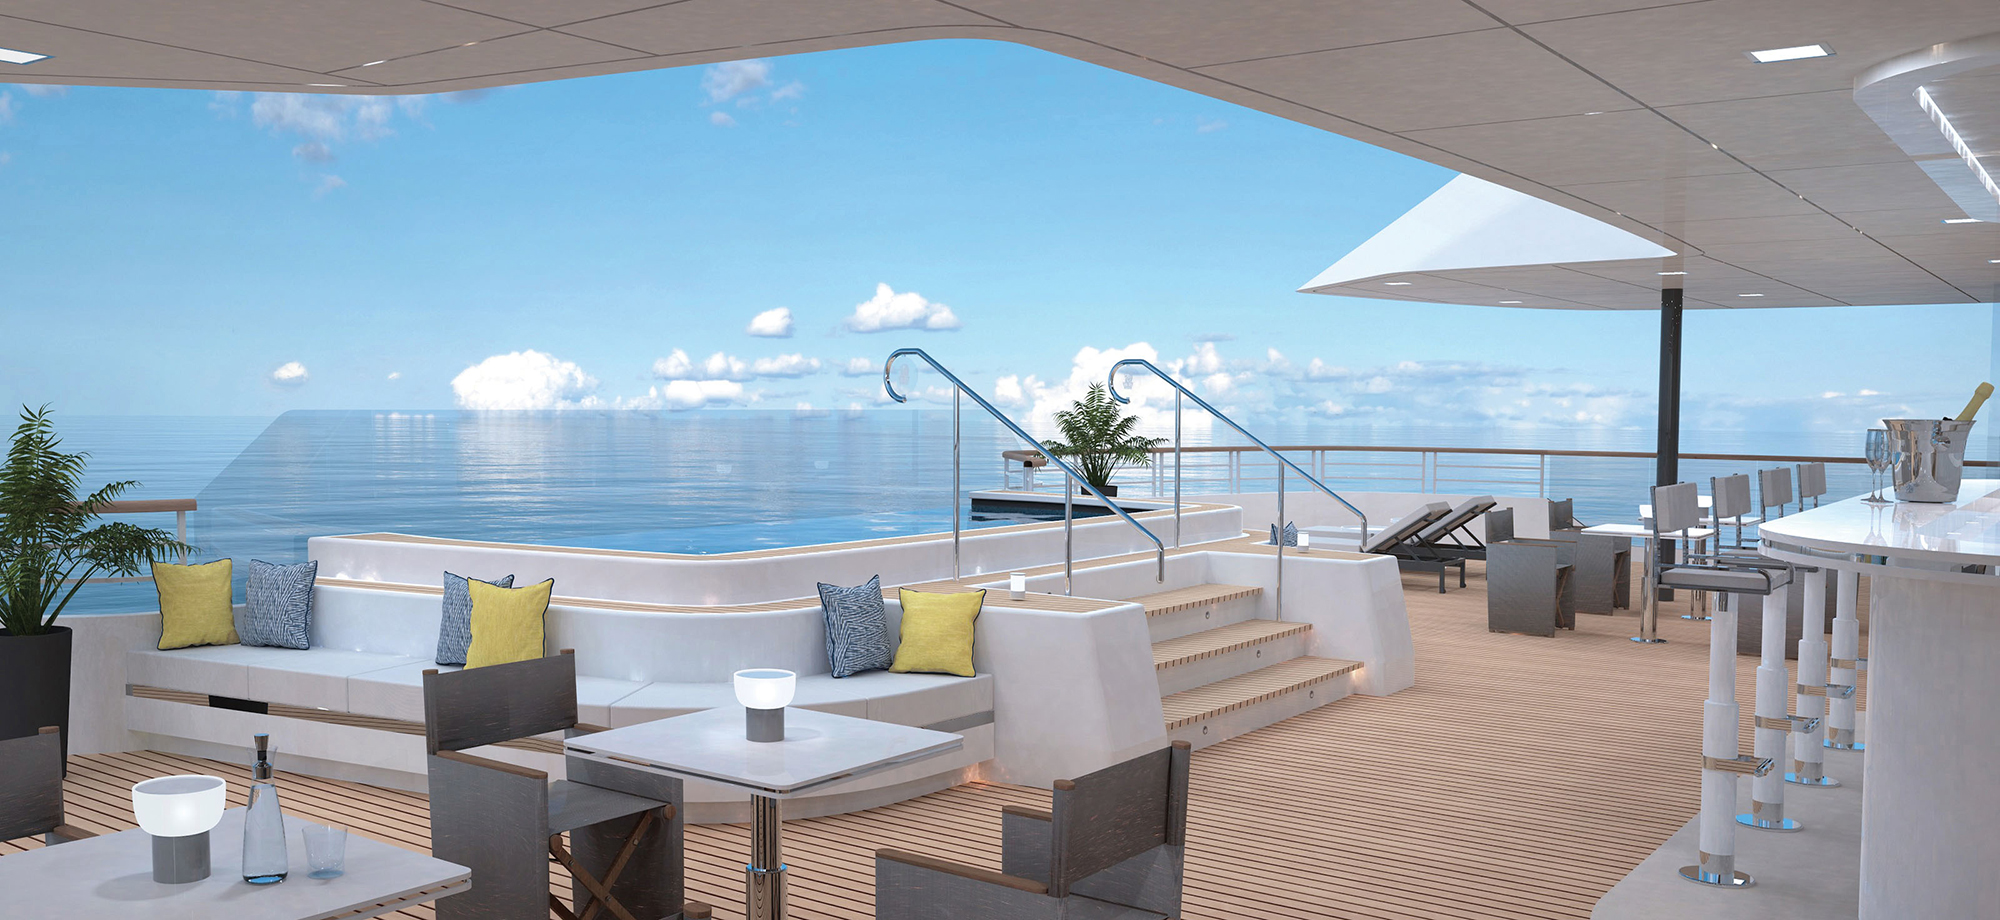 The Outdoor Grill (The Ritz-Carlton Yacht Collection)